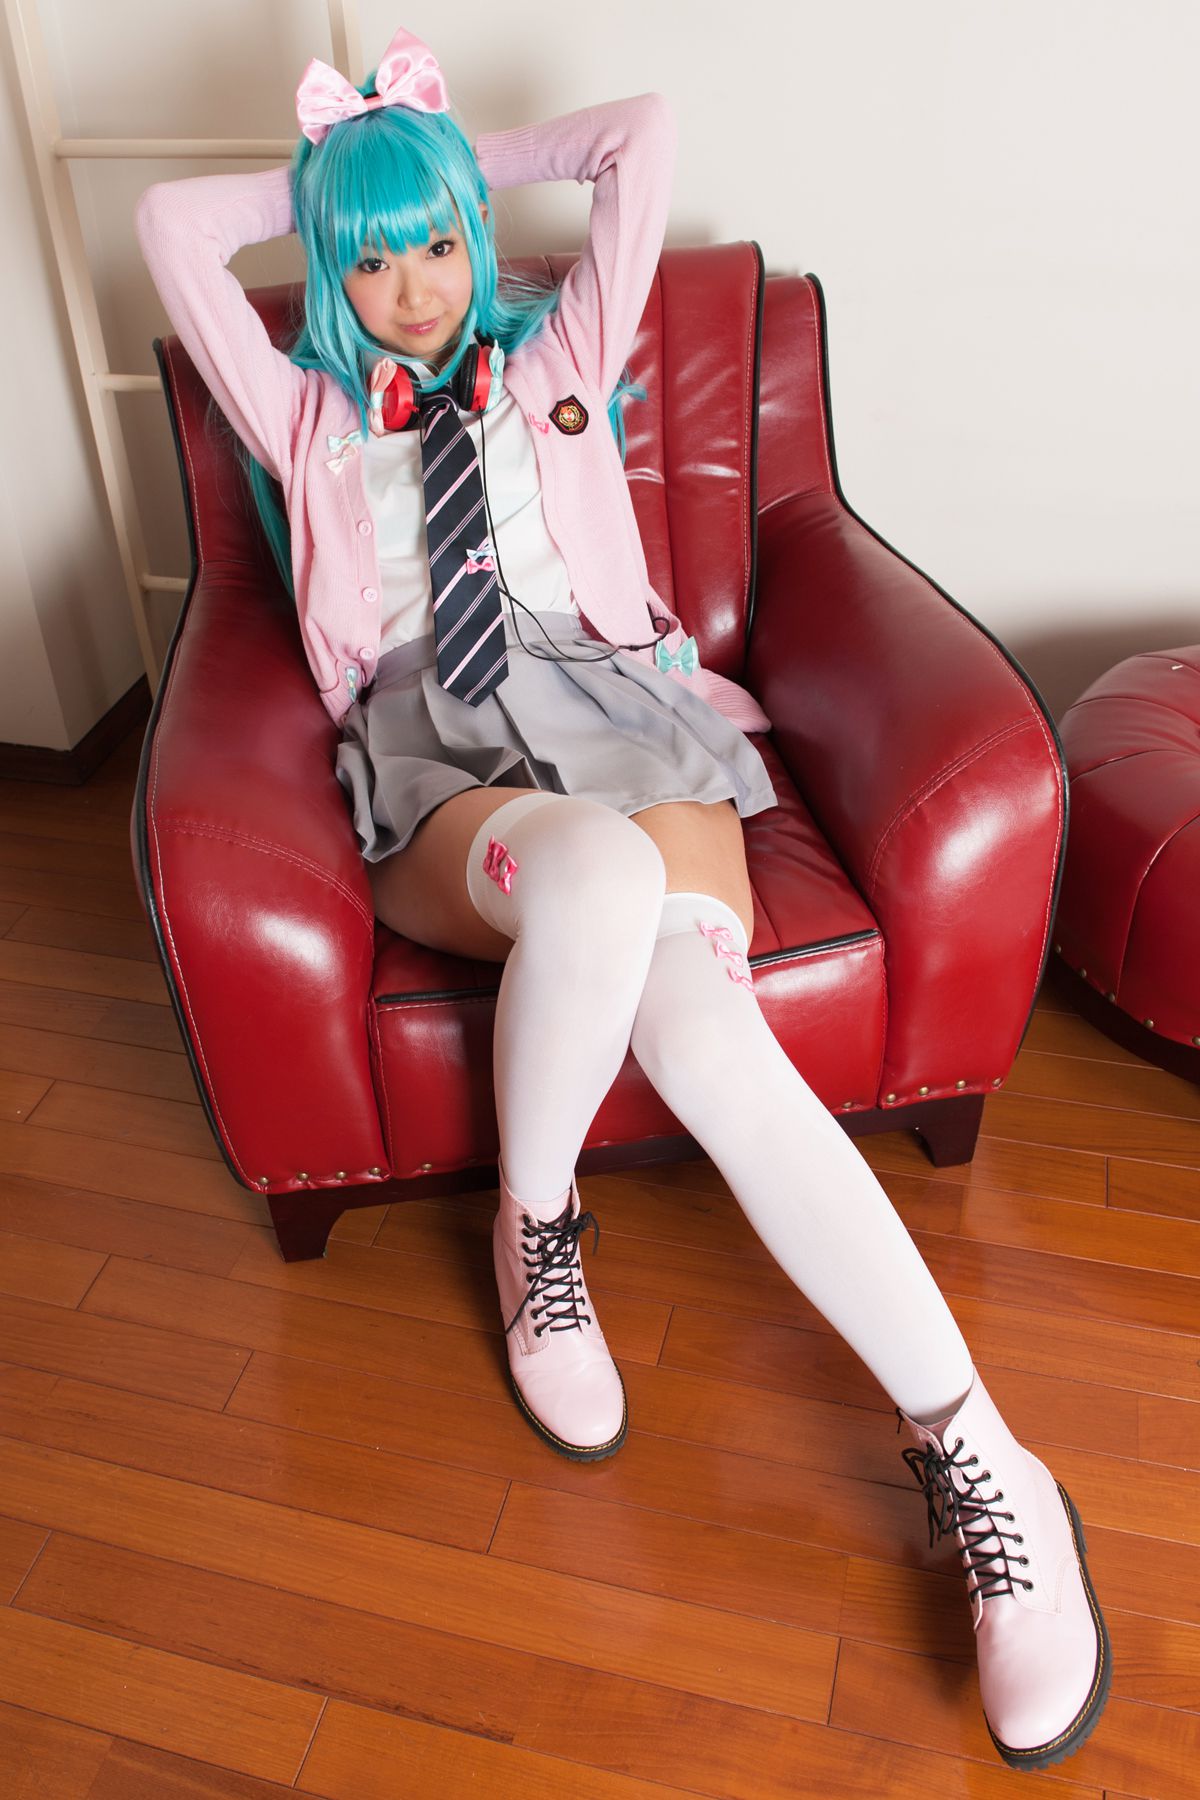 taotuhome[Cosplay] Necoco as Hatsune Miku from Vocaloid 套图第121张